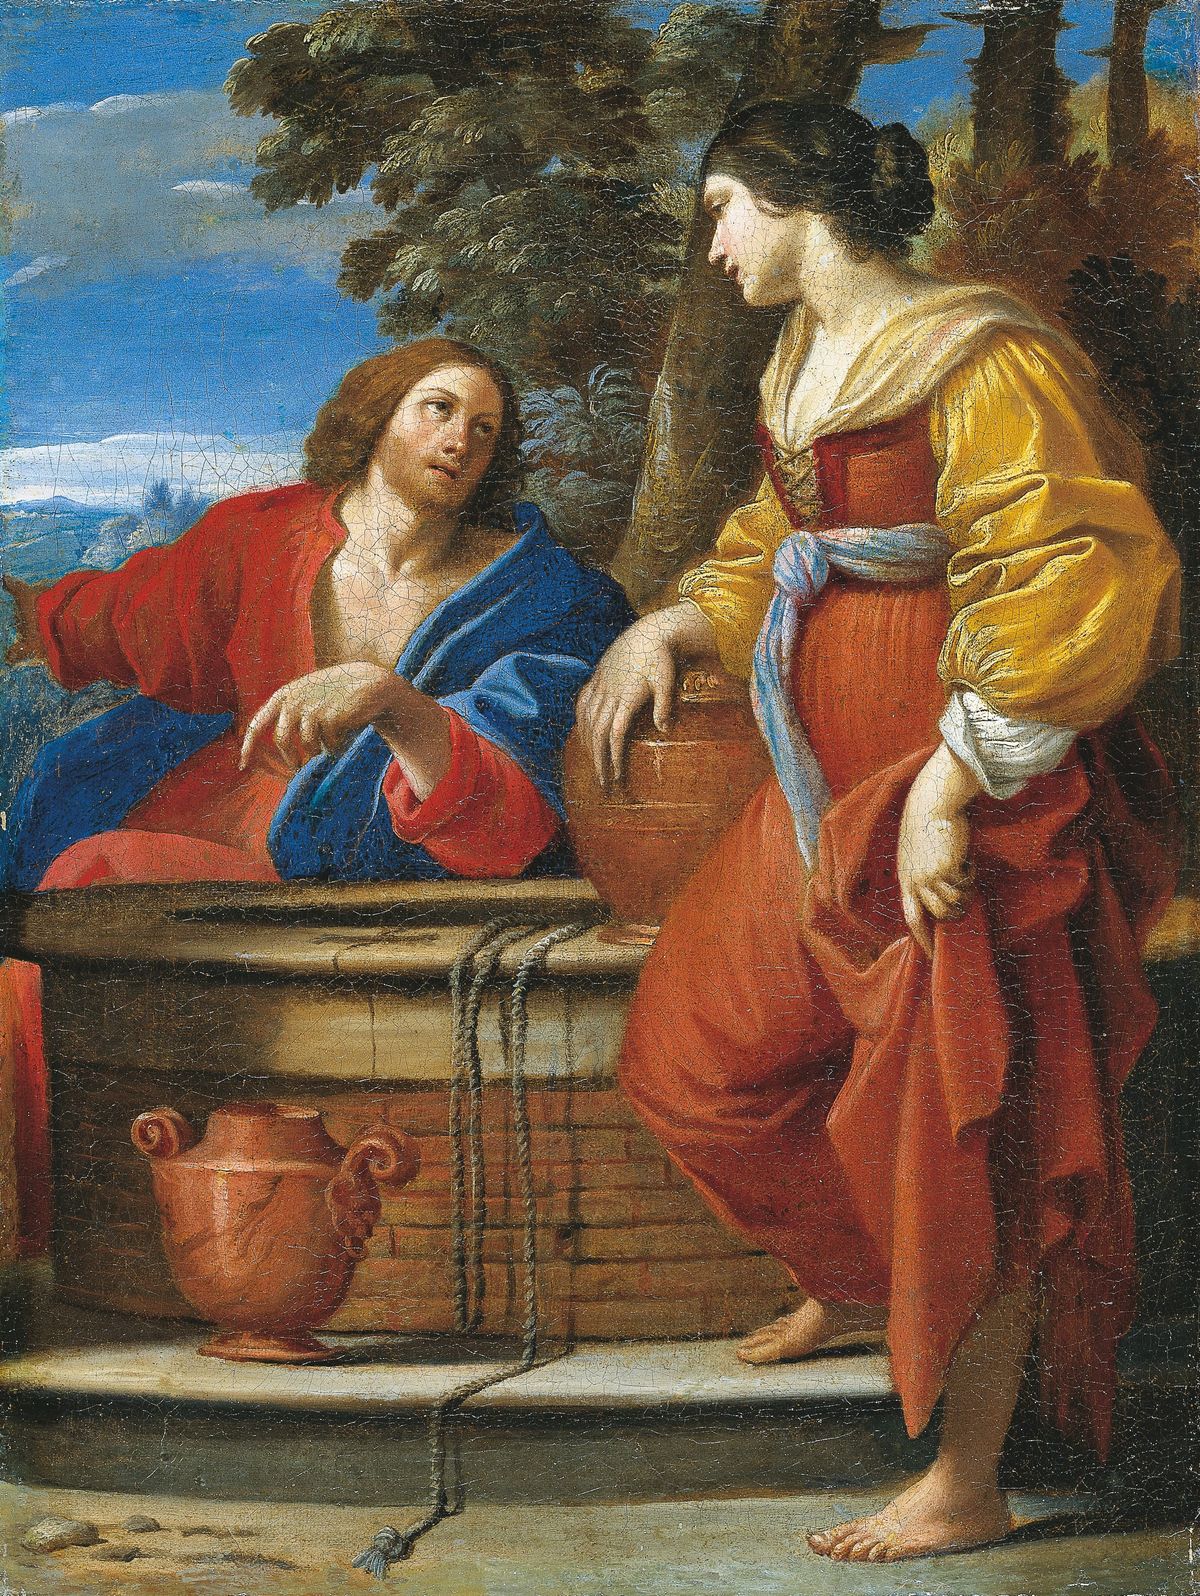 Christ with the Samaritan Woman at the Well (1609 – 1610) by Sisto Badalocchio - Public Domain Catholic Painting